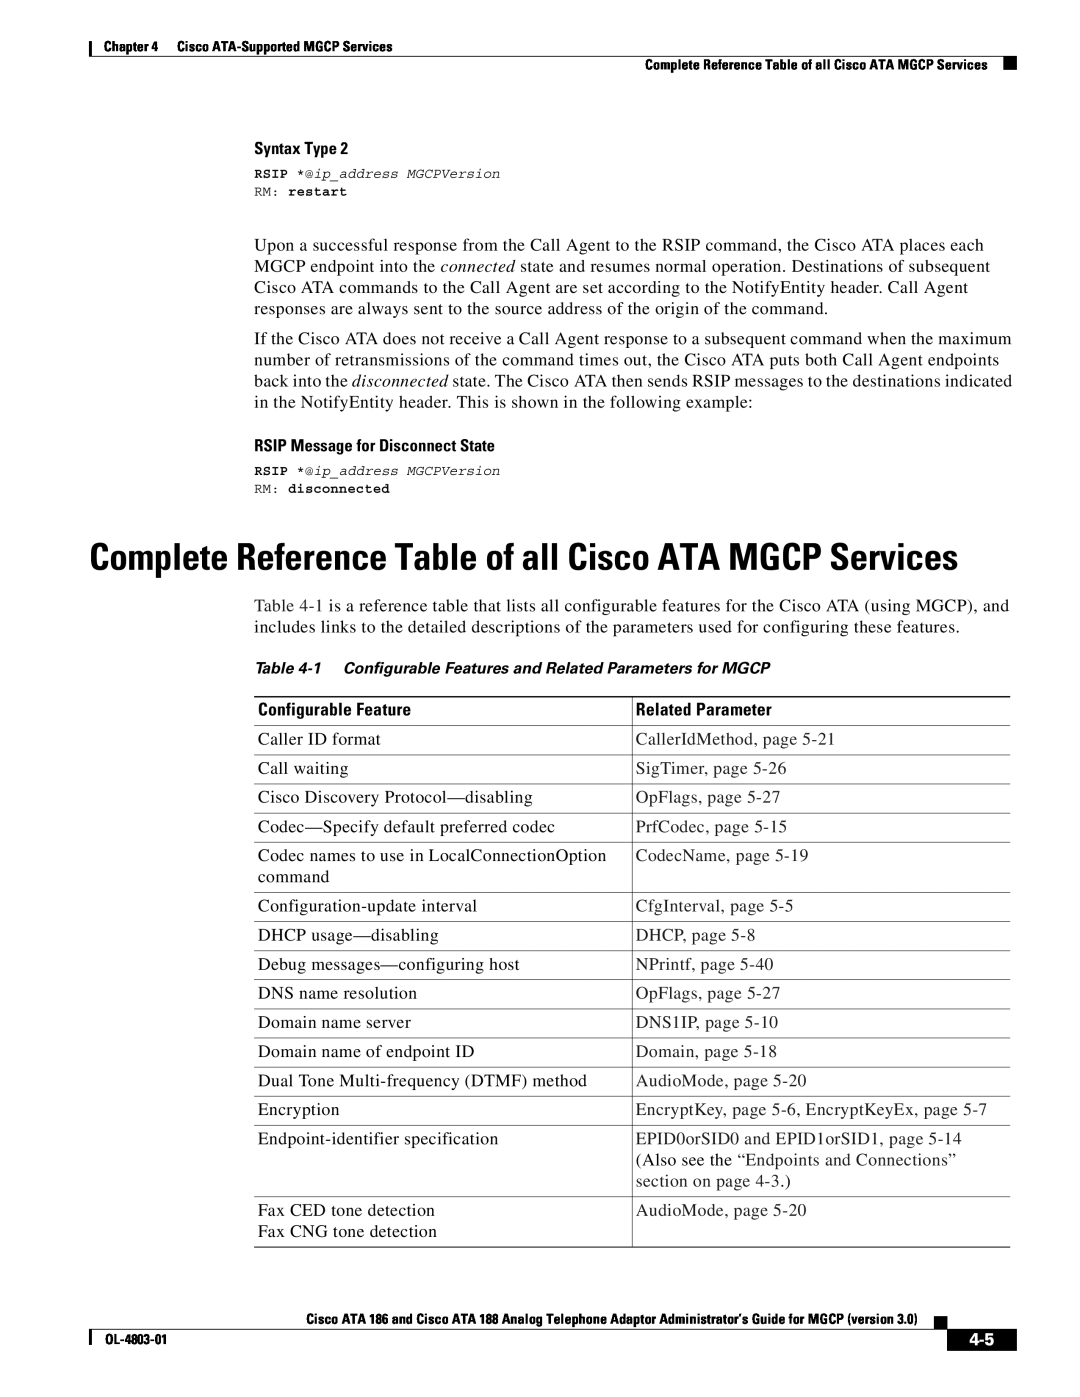 Cisco Systems ATA 186 Complete Reference Table of all Cisco ATA MGCP Services, RSIP Message for Disconnect State, command 